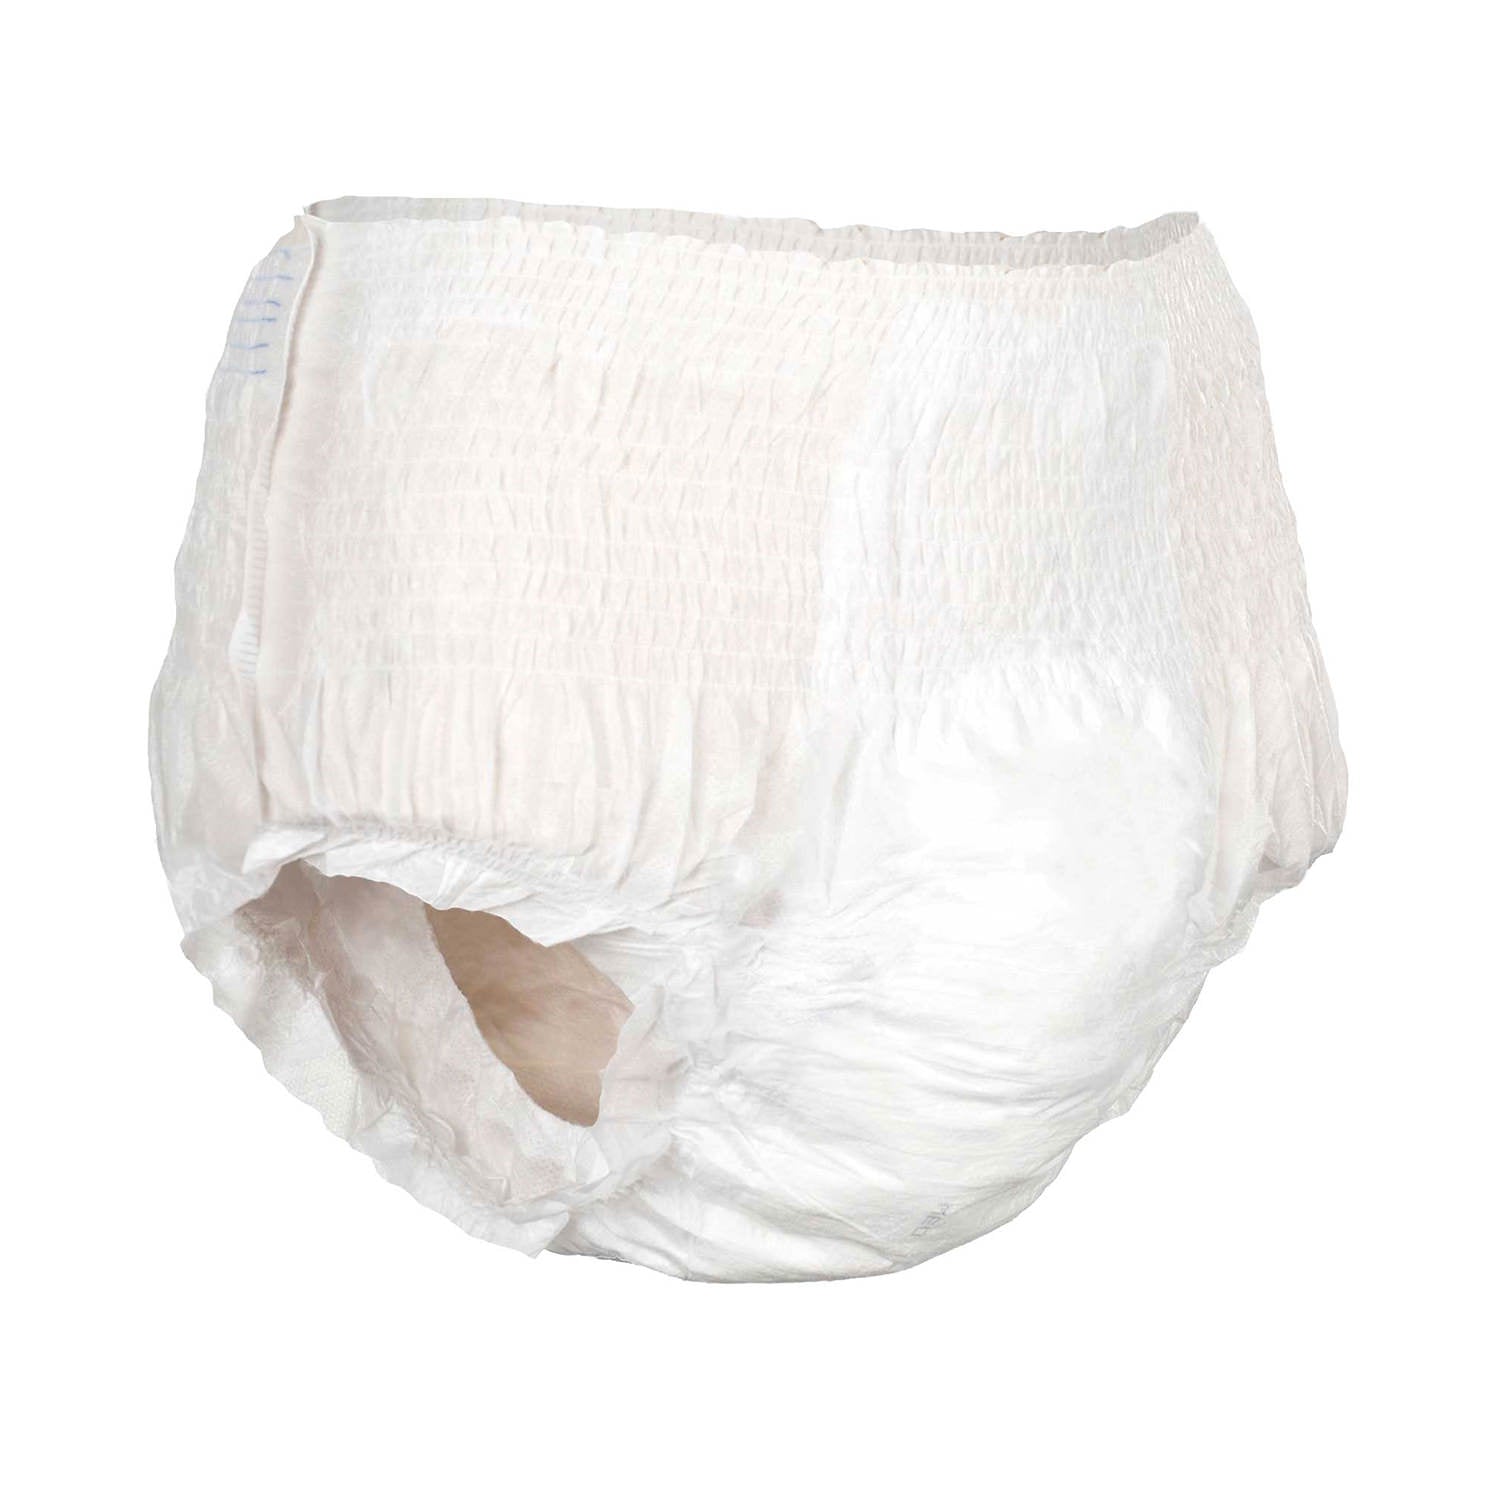 Attends Bariatric Disposable Underwear, with Tear Away Seams